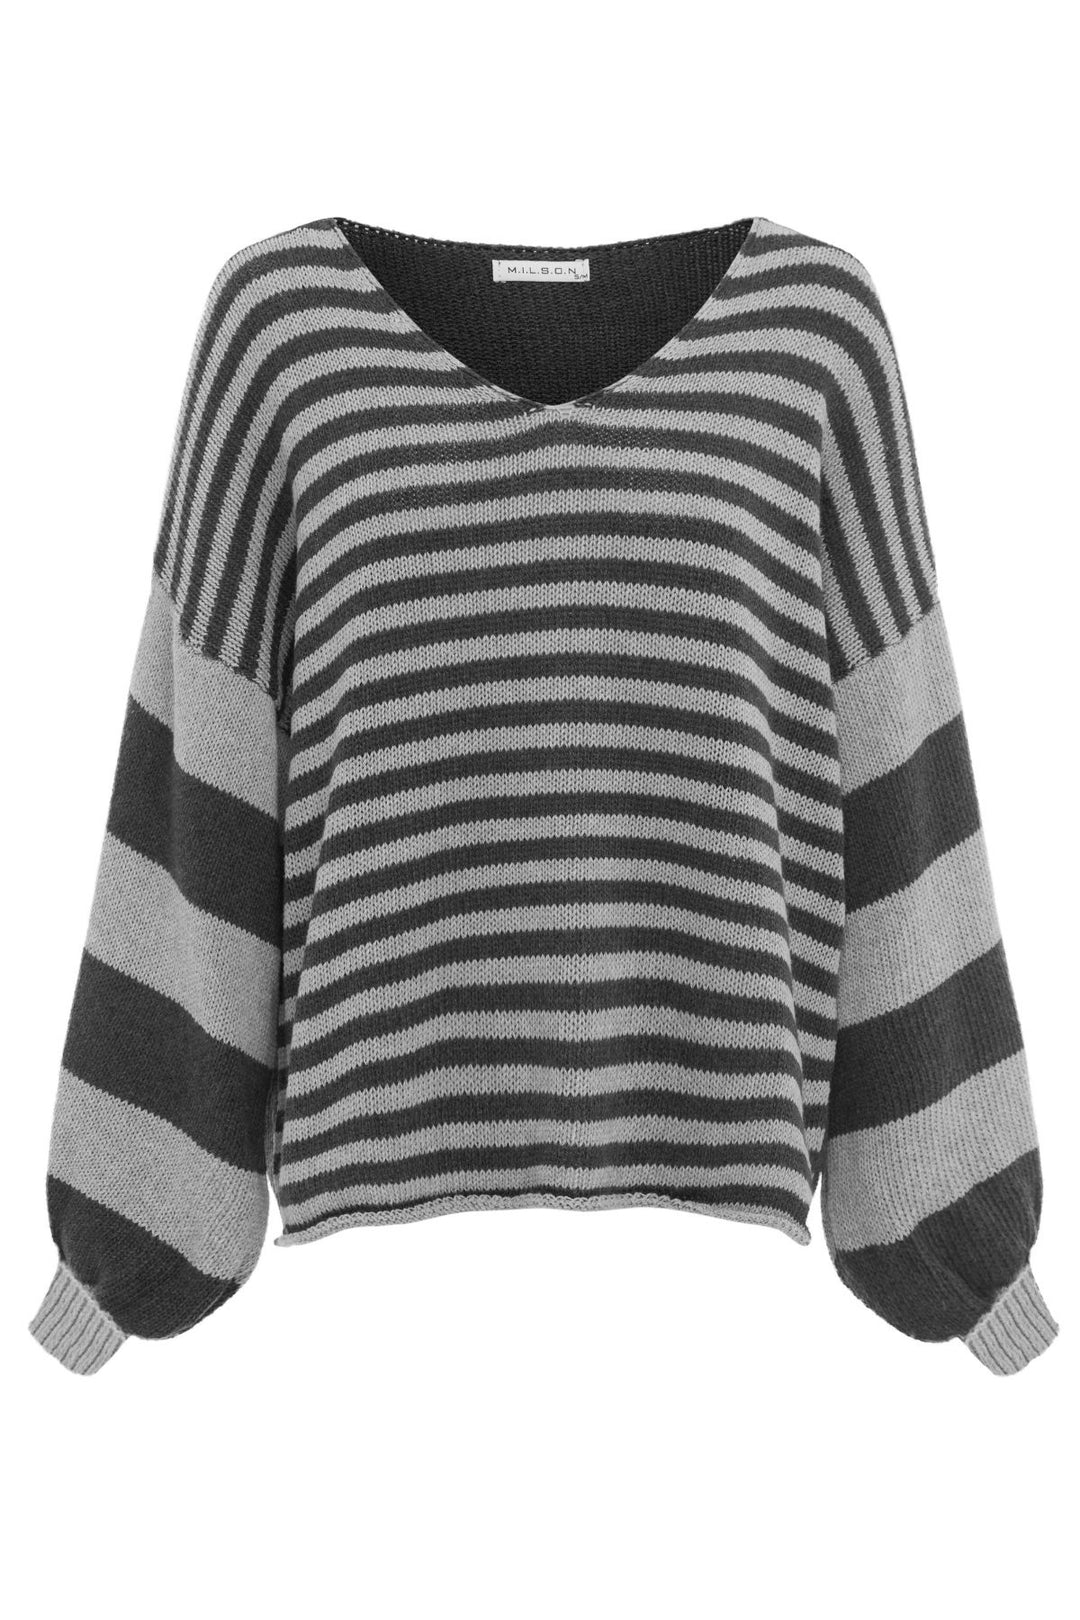 The Ottavia Sweater By MILSON is a gorgeous v-neck knit. Featuring chunky bell sleeves and a contrasting stripe pattern across the front and back. Perfect for layering, pair this beauty with your favourite jeans or pants.  Brand : MILSON Style Code : ML4153 Ottavia V-Neck Colour : Charcoal Fabric : 50% Cotton 50% Acrylic Cold hand wash Made in Italy